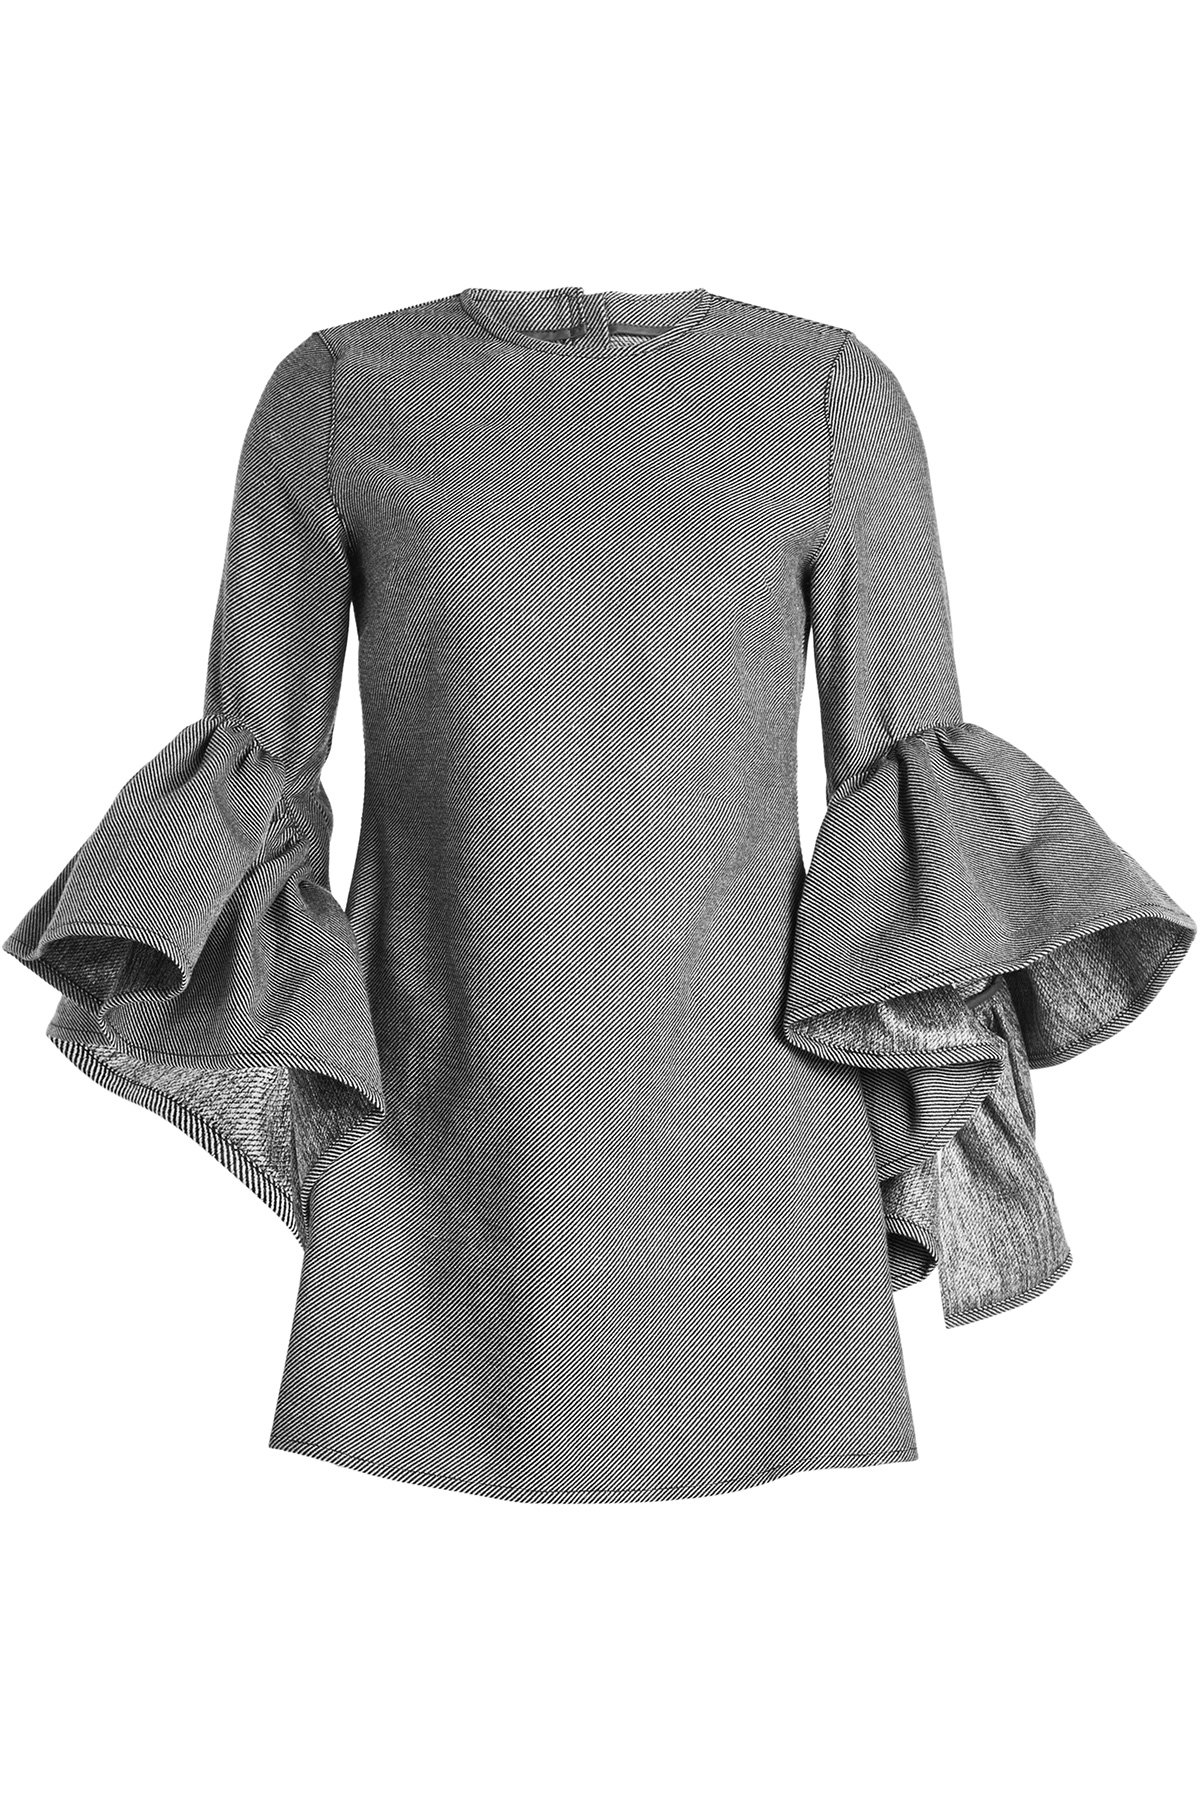 Marques' Almeida - Twill Dress with Voluminous Sleeves